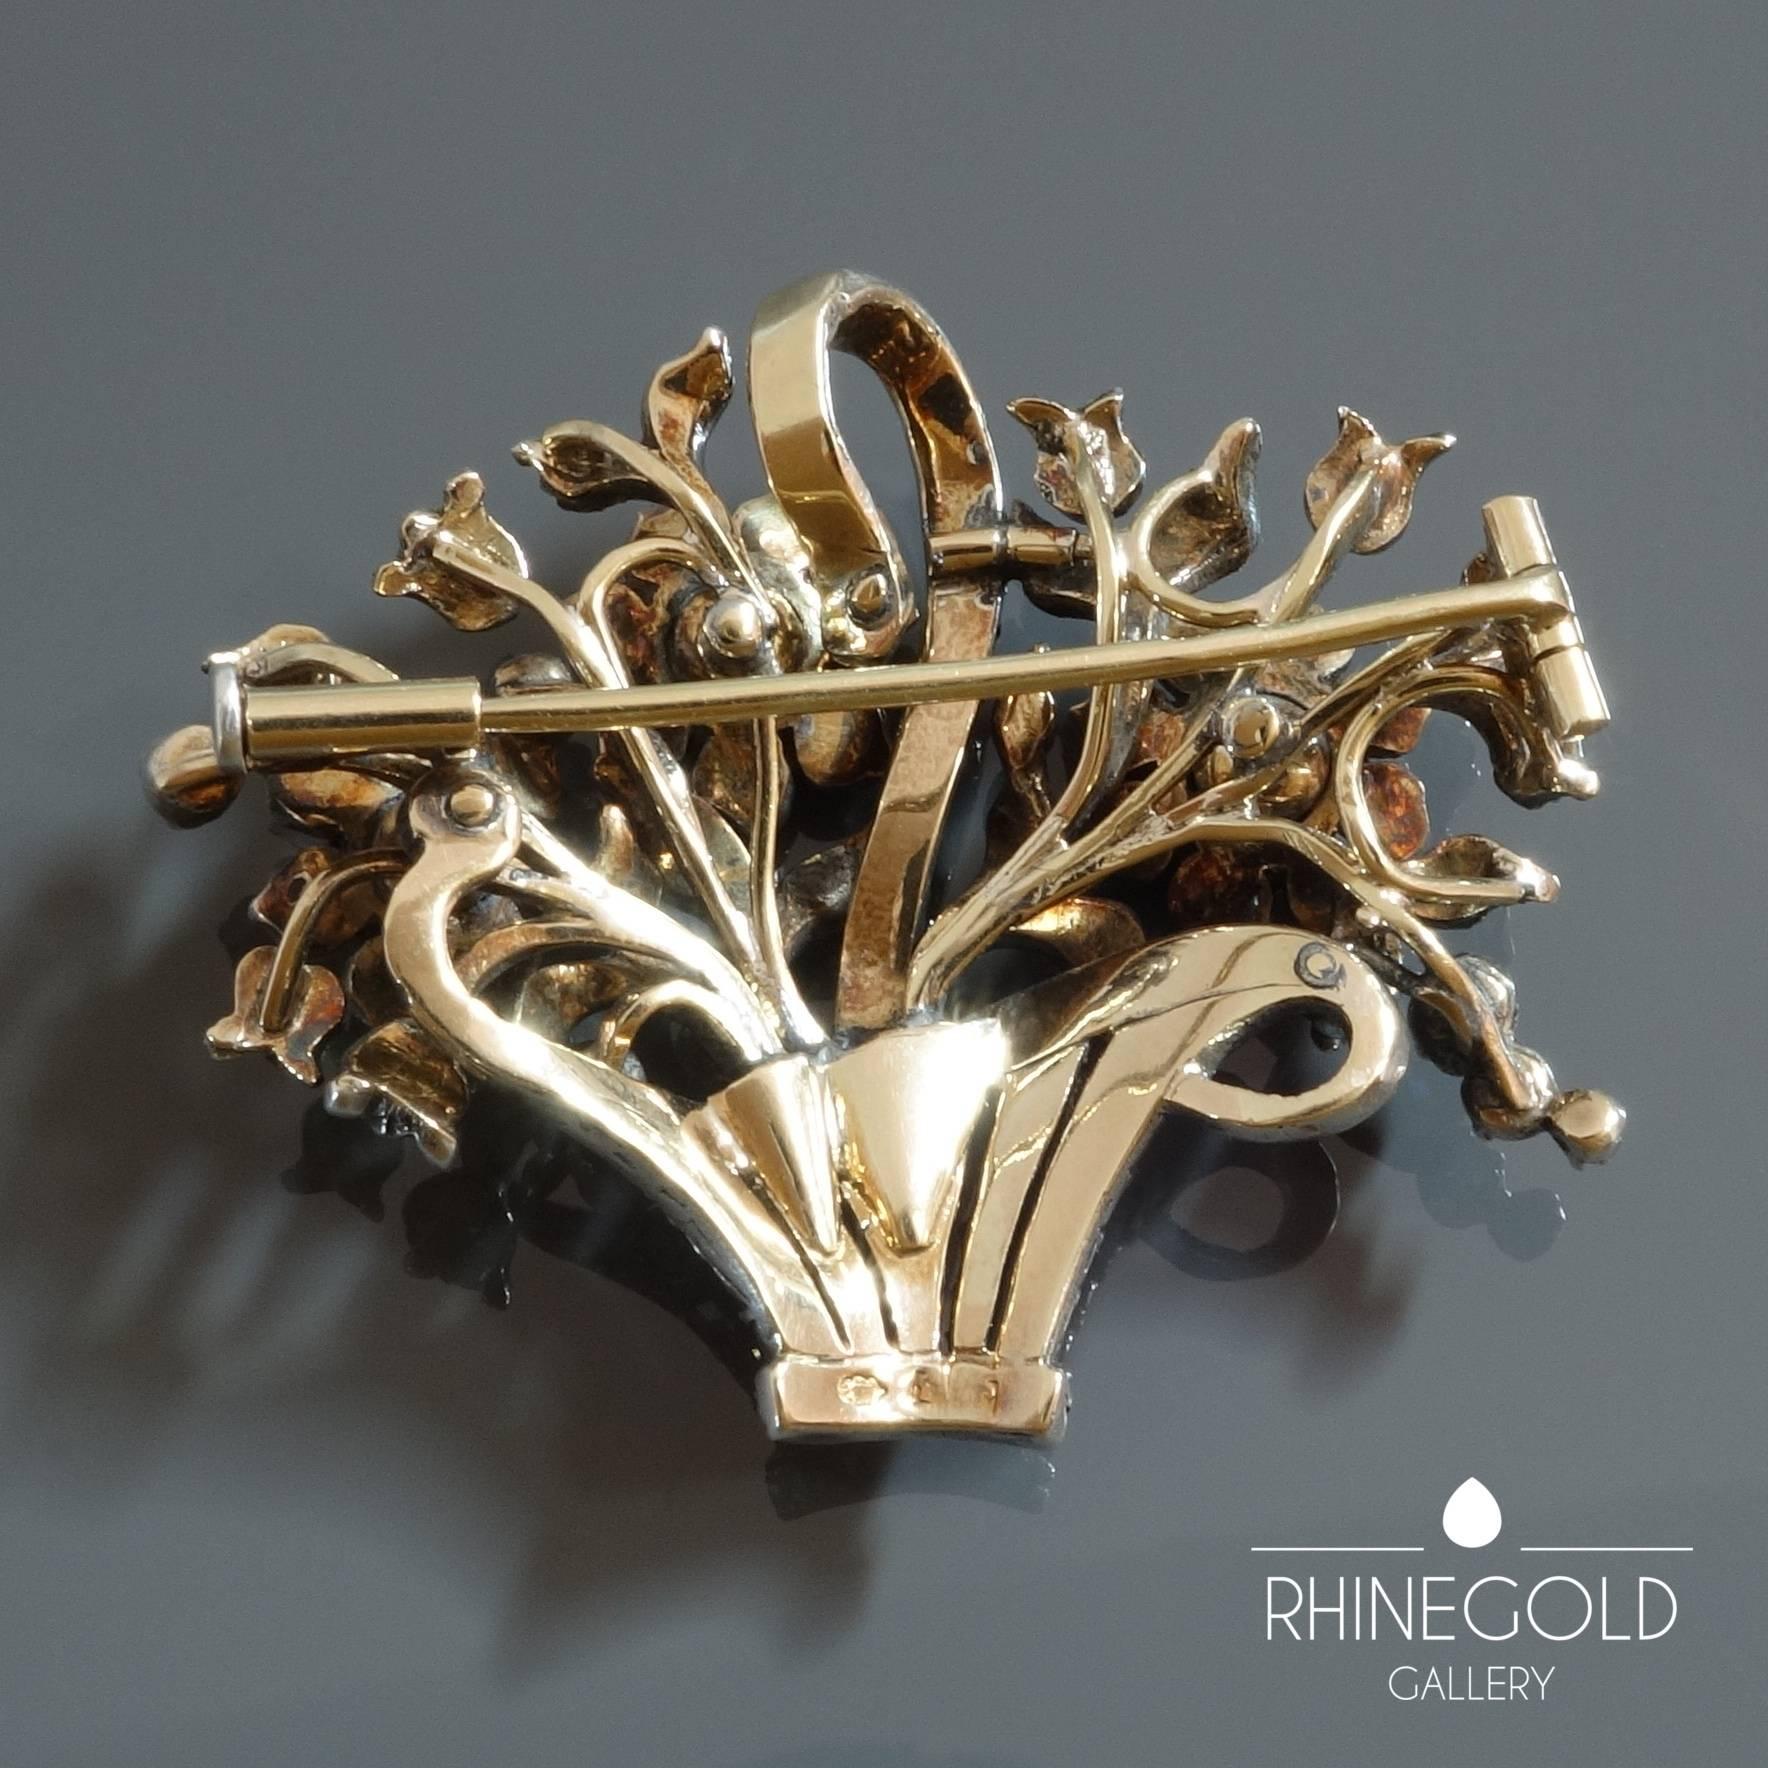 Johan Rozendaal Rose Cut Diamond Gold Silver Giadinetto Flower Basket Brooch
Silver on 14k yellow gold, rose cut diamonds (approx. 2.3 carat in total)
4.1 cm by 3.2 cm (approx. 1 5/8” by 1 ¼”)
Weight approx. 13.5 grams
Marks (on brooch and needle):